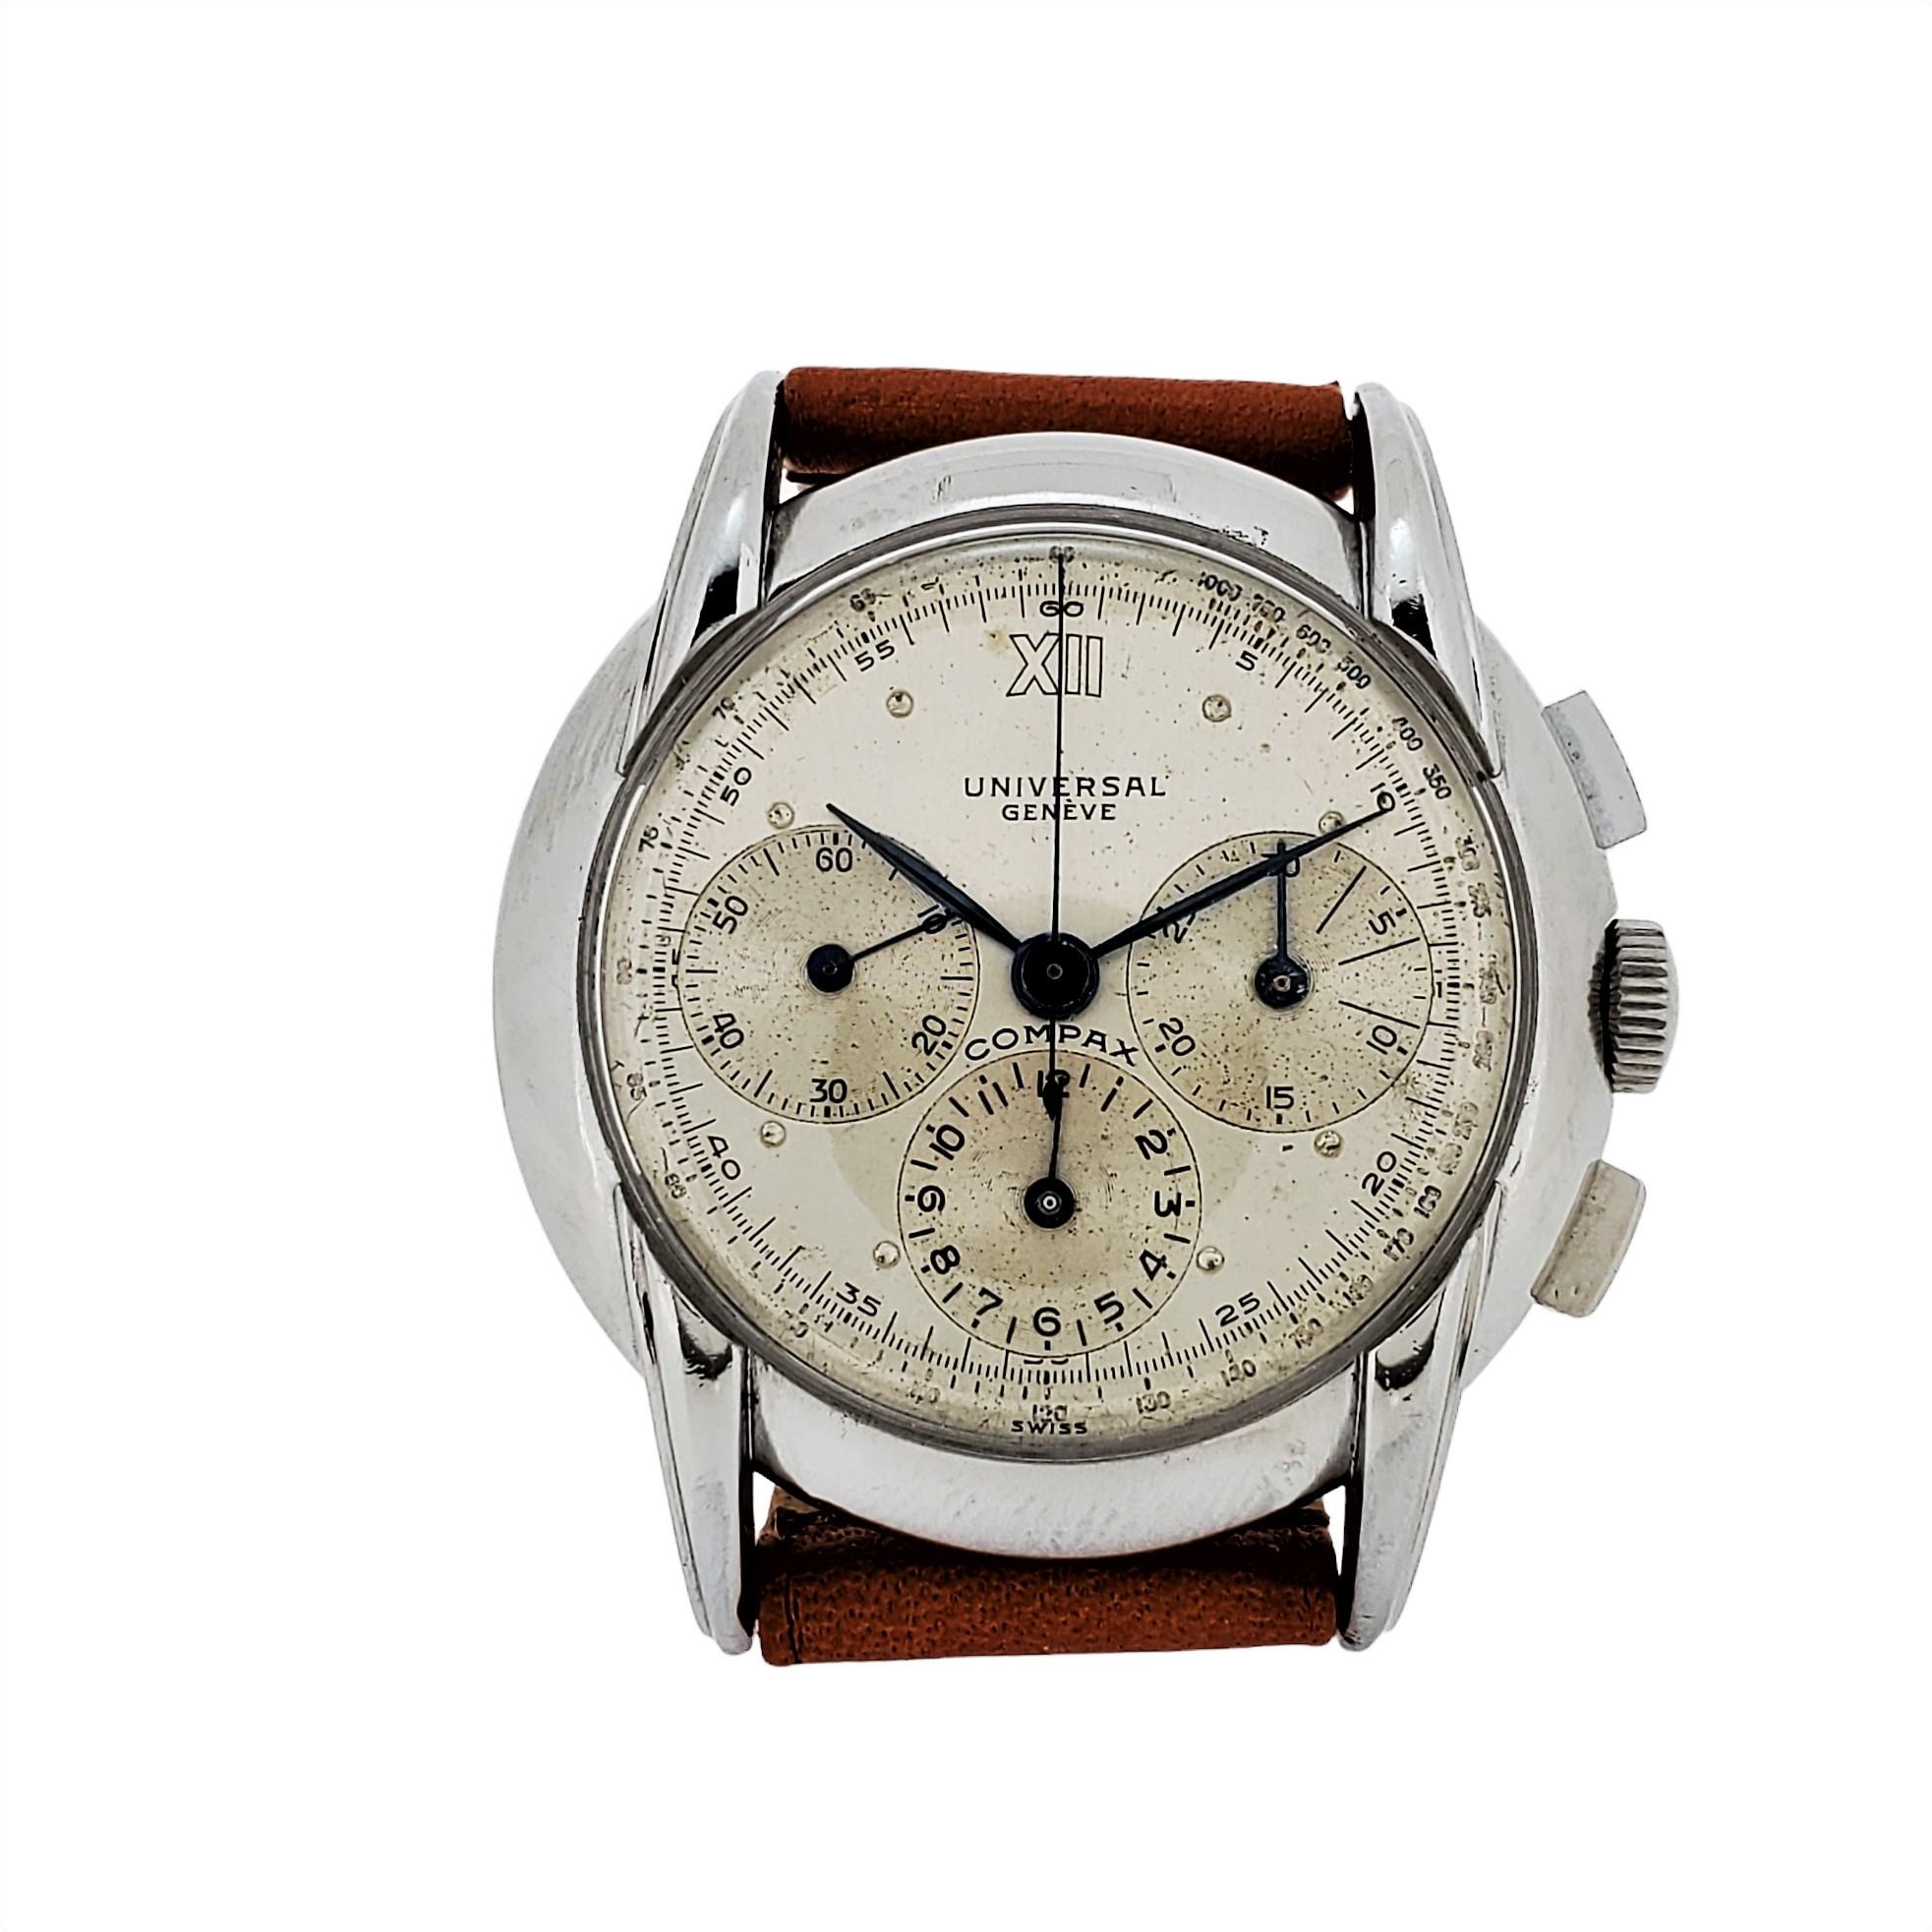 Stainless Steel Universal Geneve Compax Chronograph, Circa 1950's In Good Condition For Sale In Santa Monica, CA